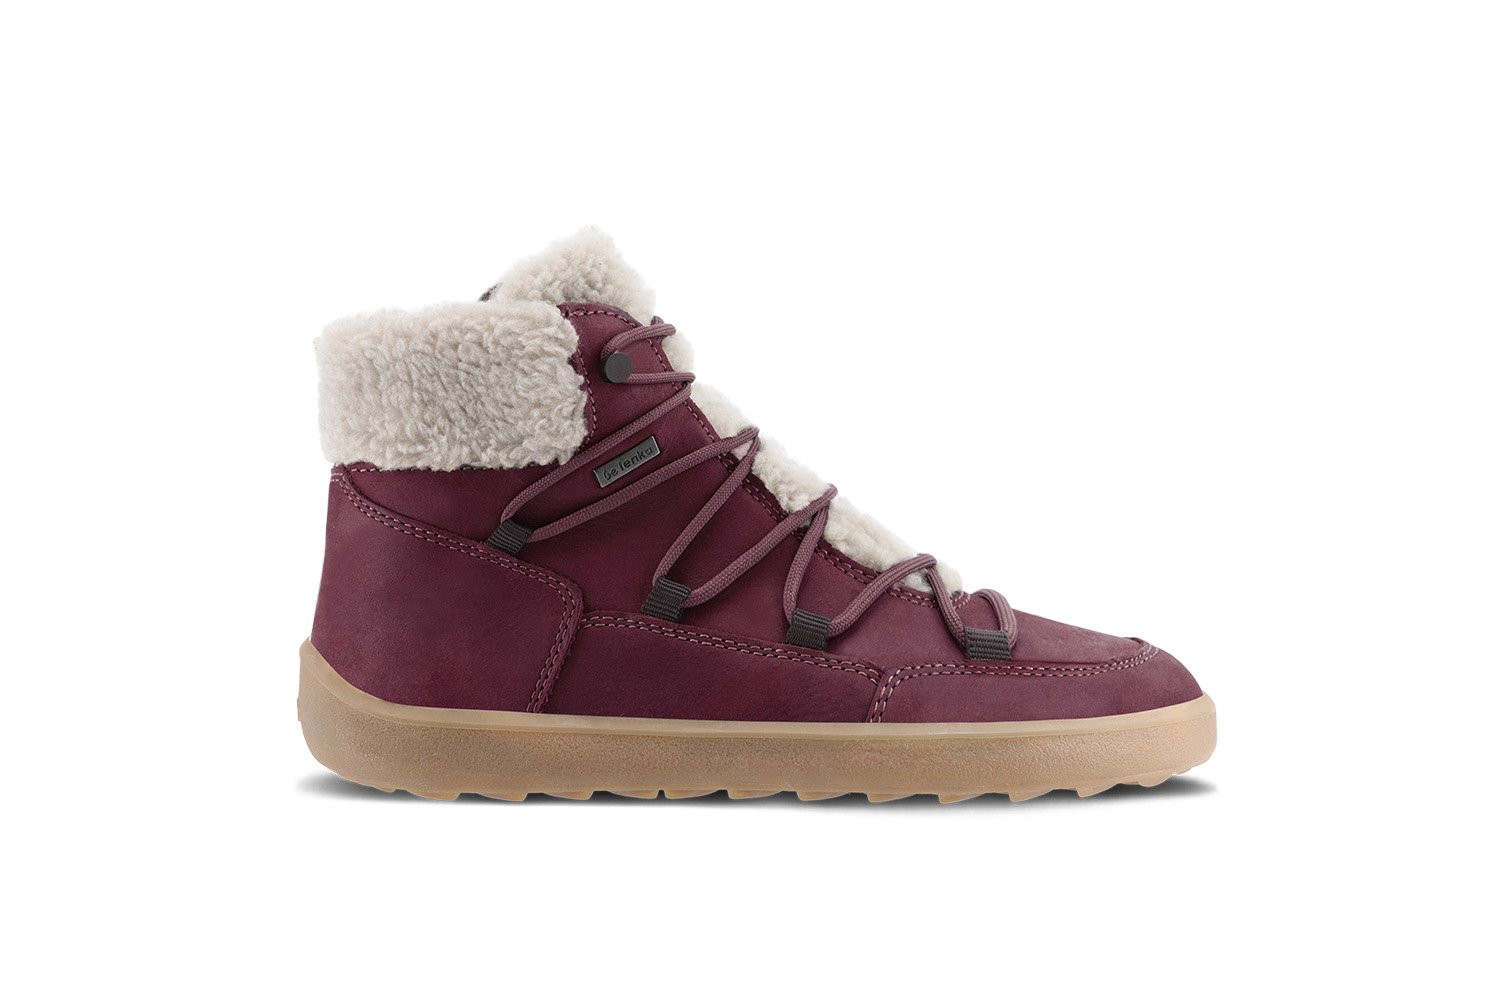 Barefoot winter shoes for women